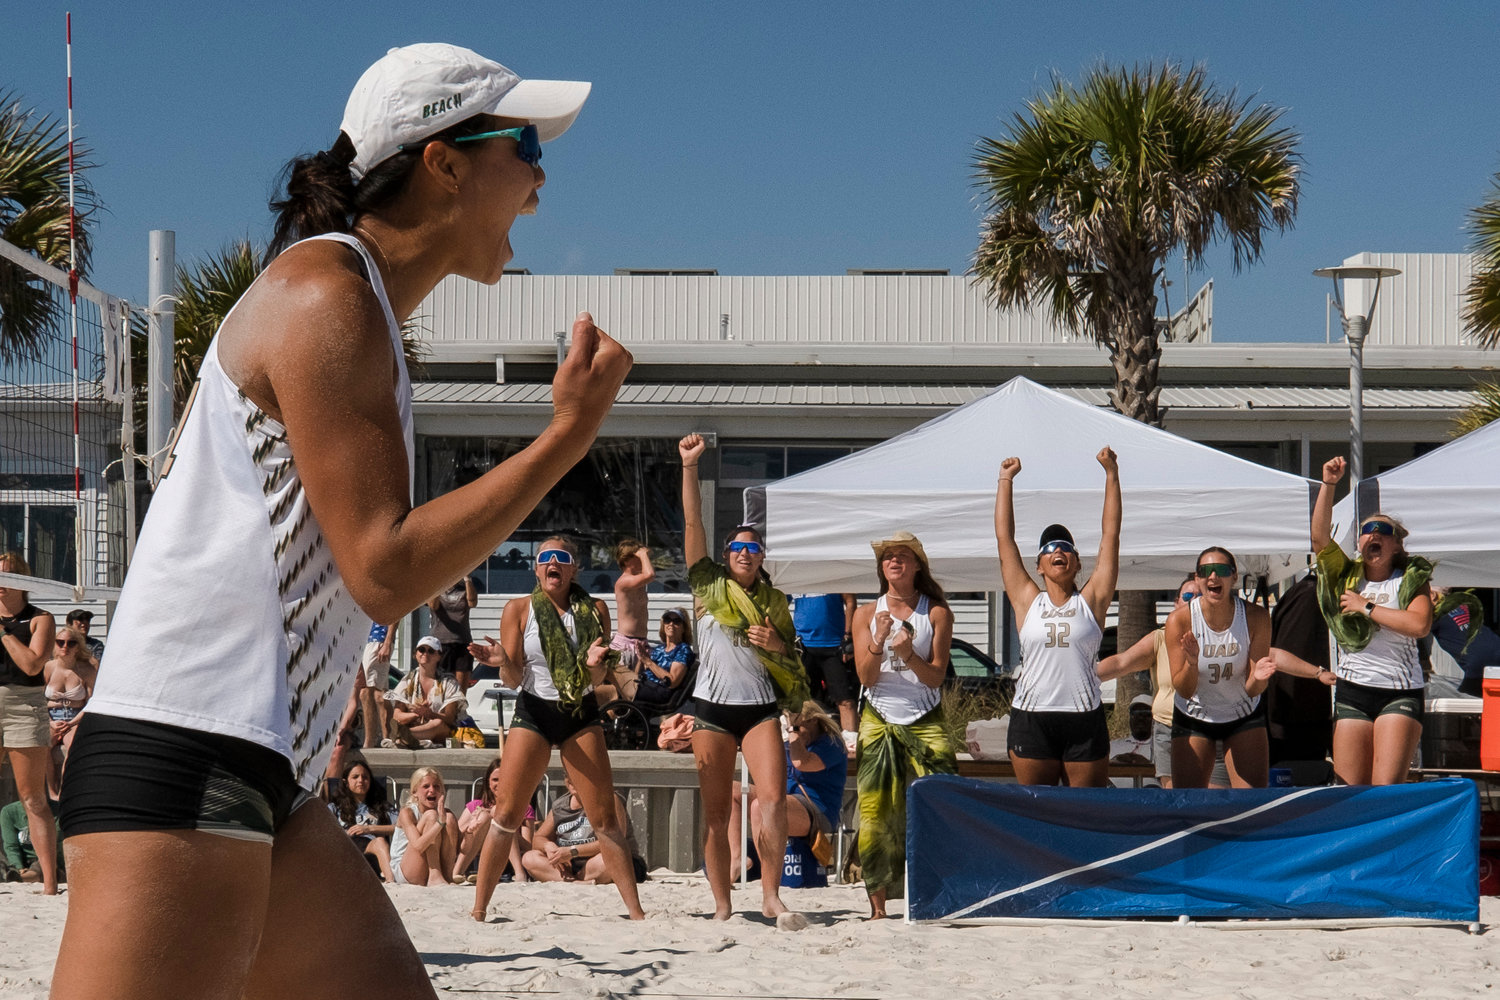 Get a first look at NCAA beach volleyball championship teams in Gulf Shores this weekend